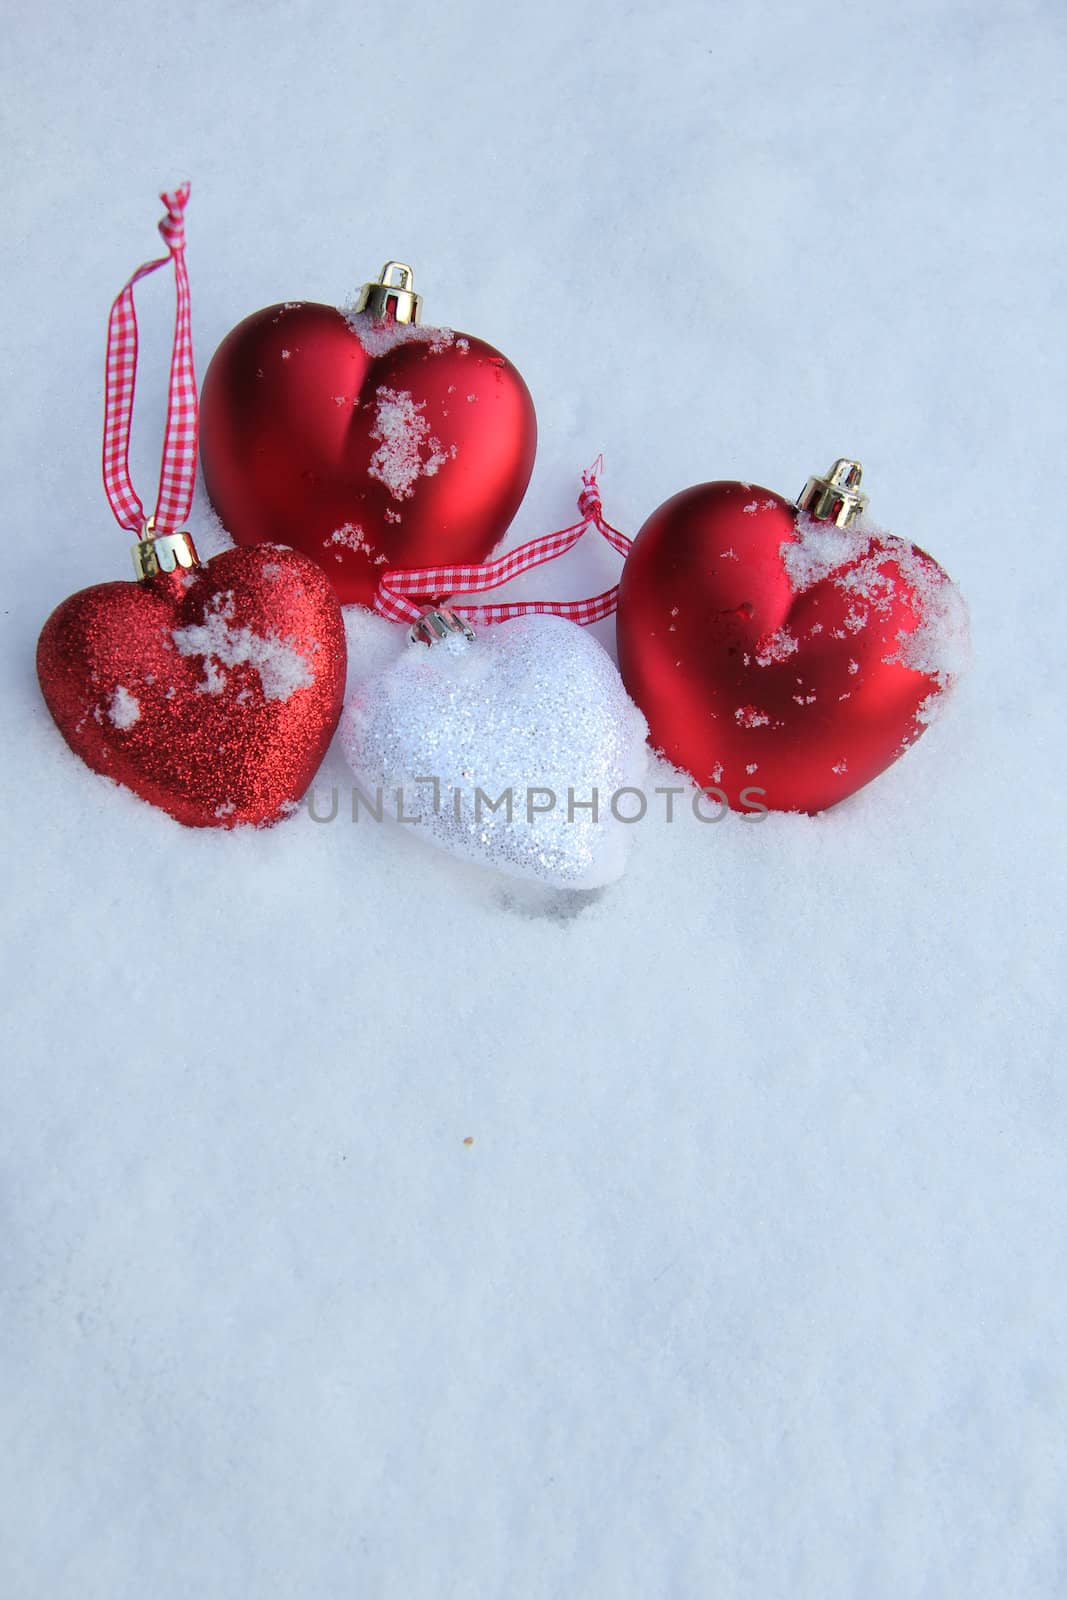 White and red heart shaped ornaments in fresh fallen snow